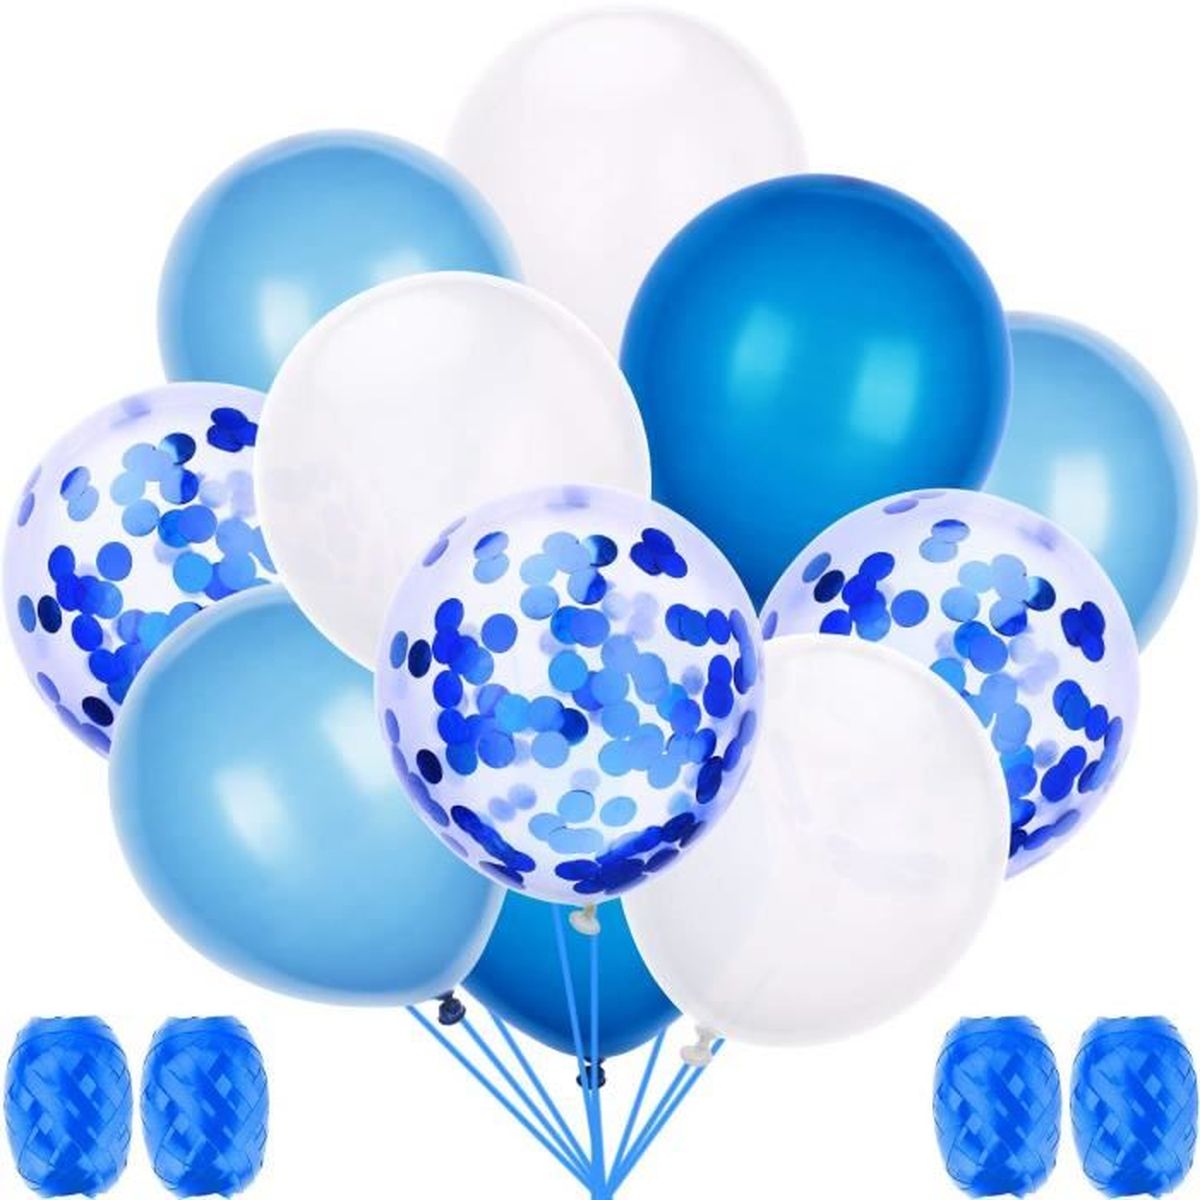 50-100 pcs Anniversaire Mariage Baby Shower Party perle latex Ballons 5/" baloons